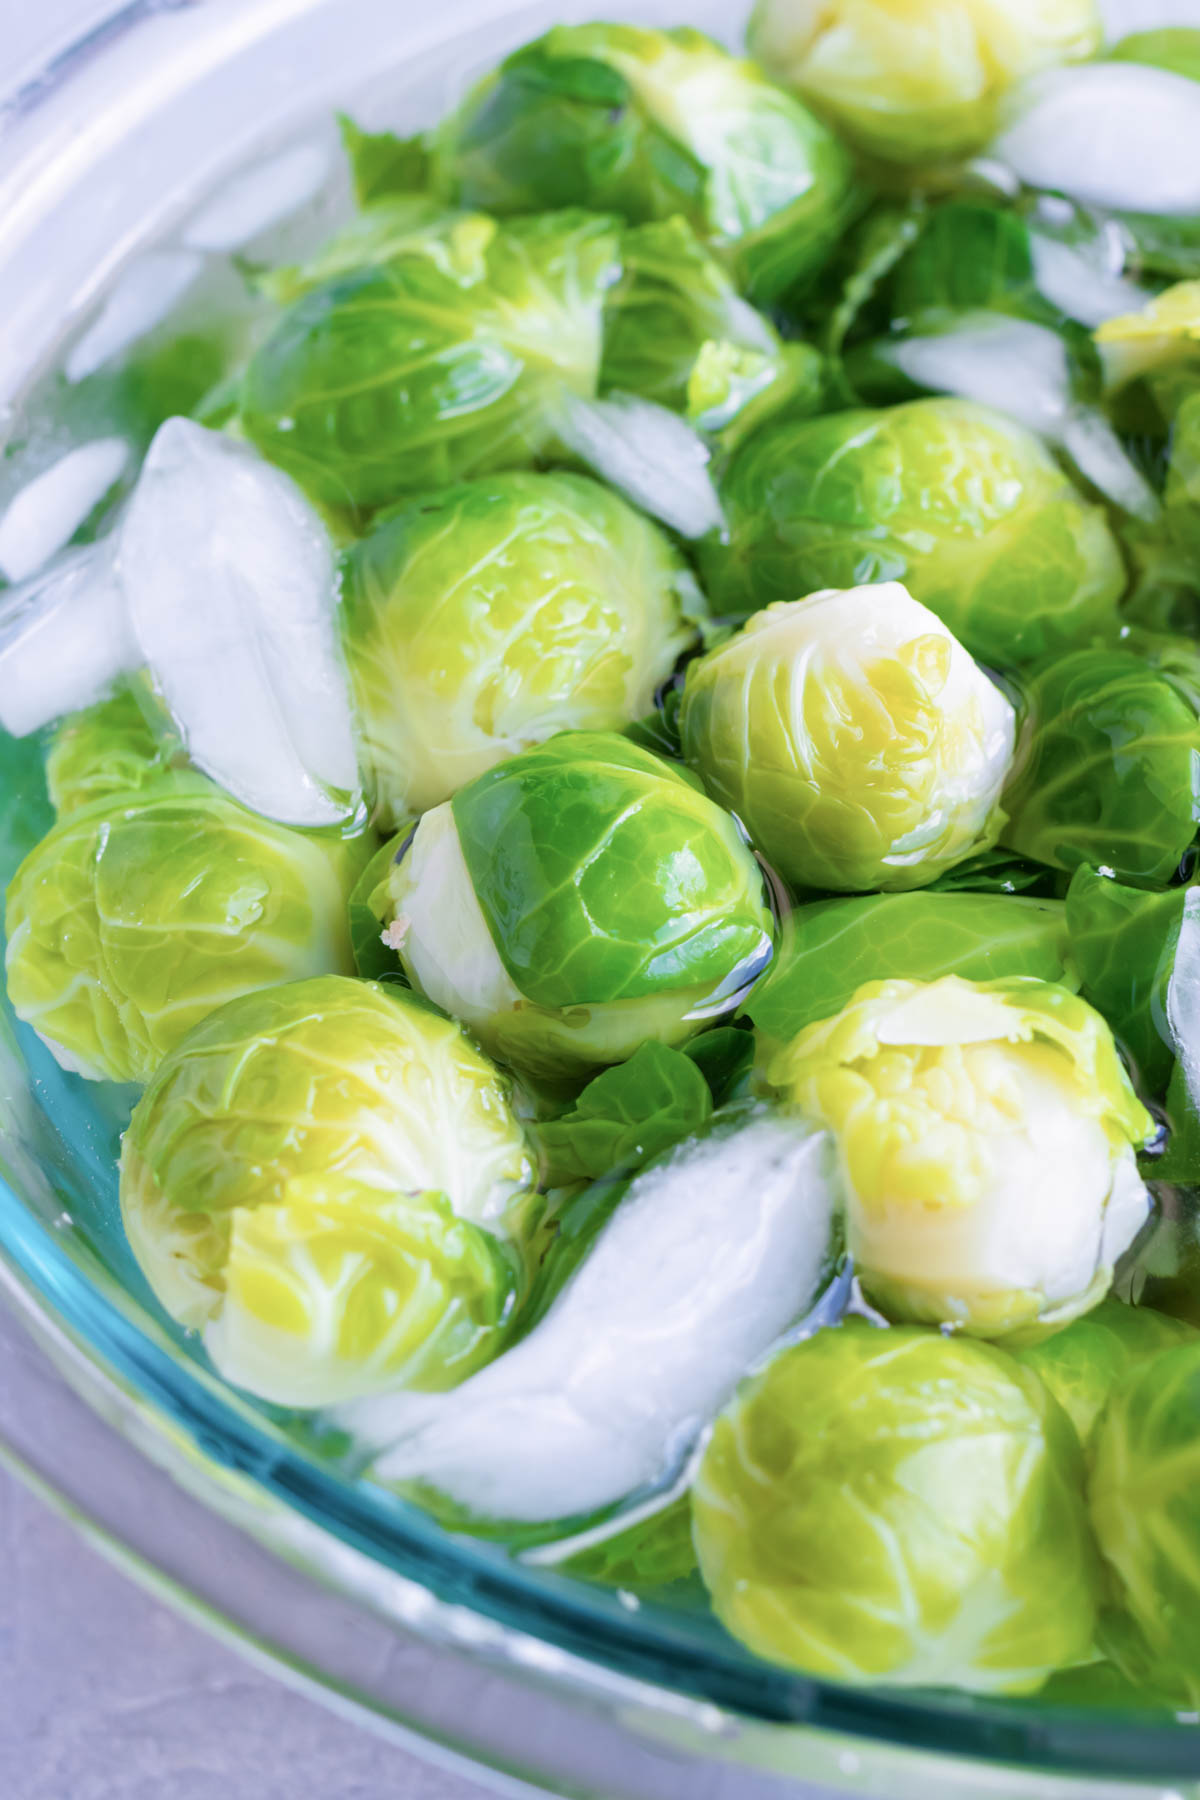 Boiled Brussels sprouts are added to a bowl of ice water.